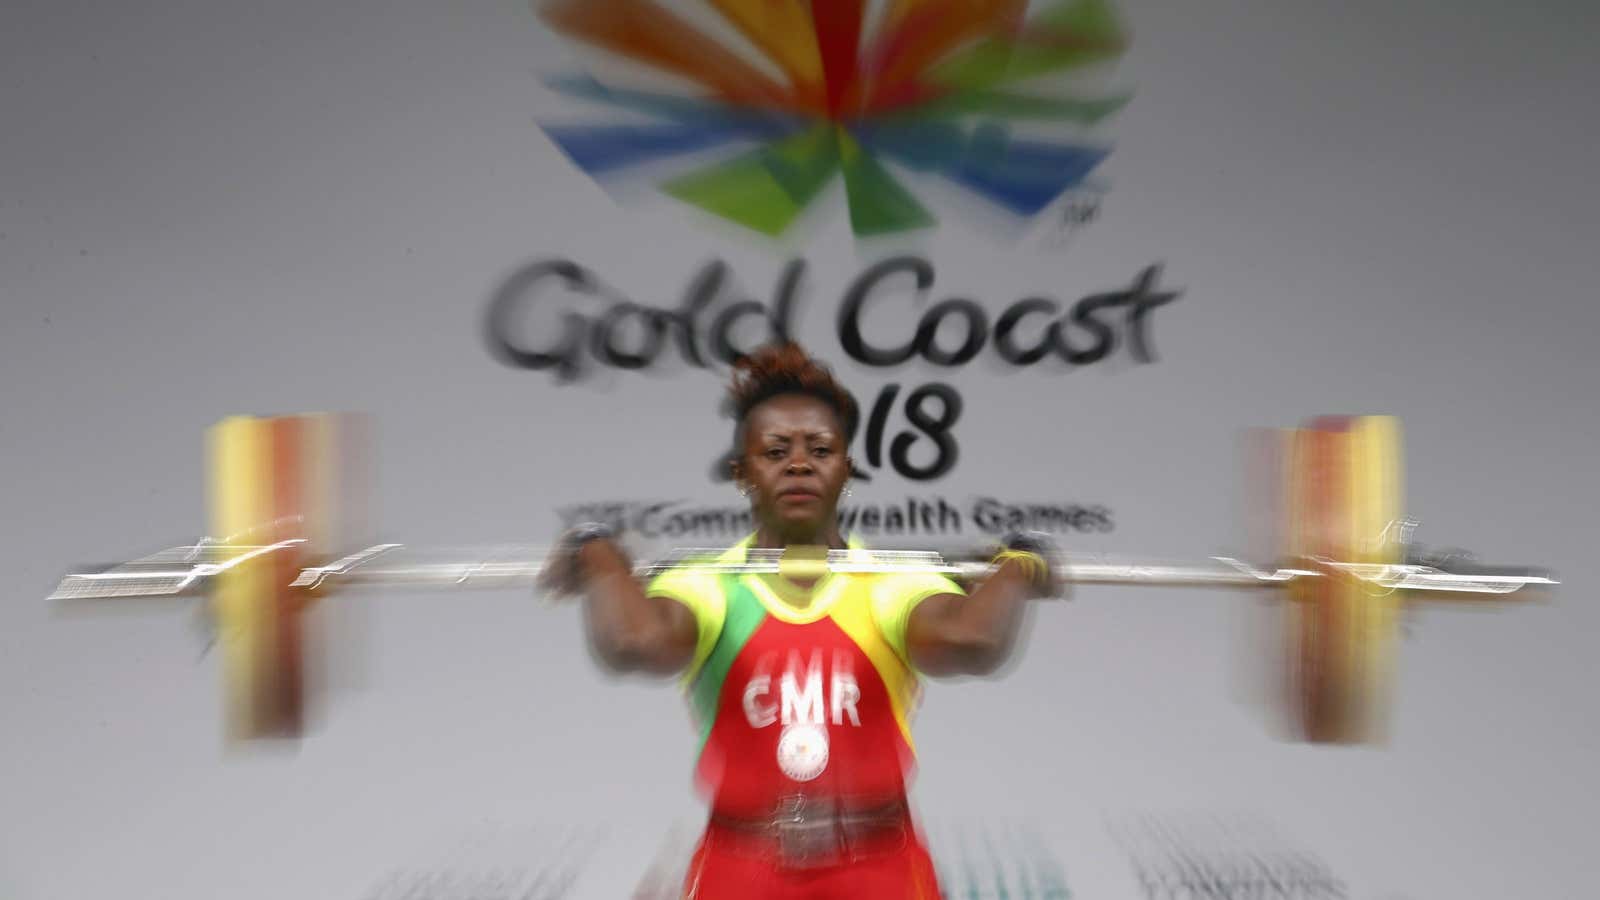 Cameroon’s Arcangeline Fouodji Sonkbou weightlifter is said to have gone missing.